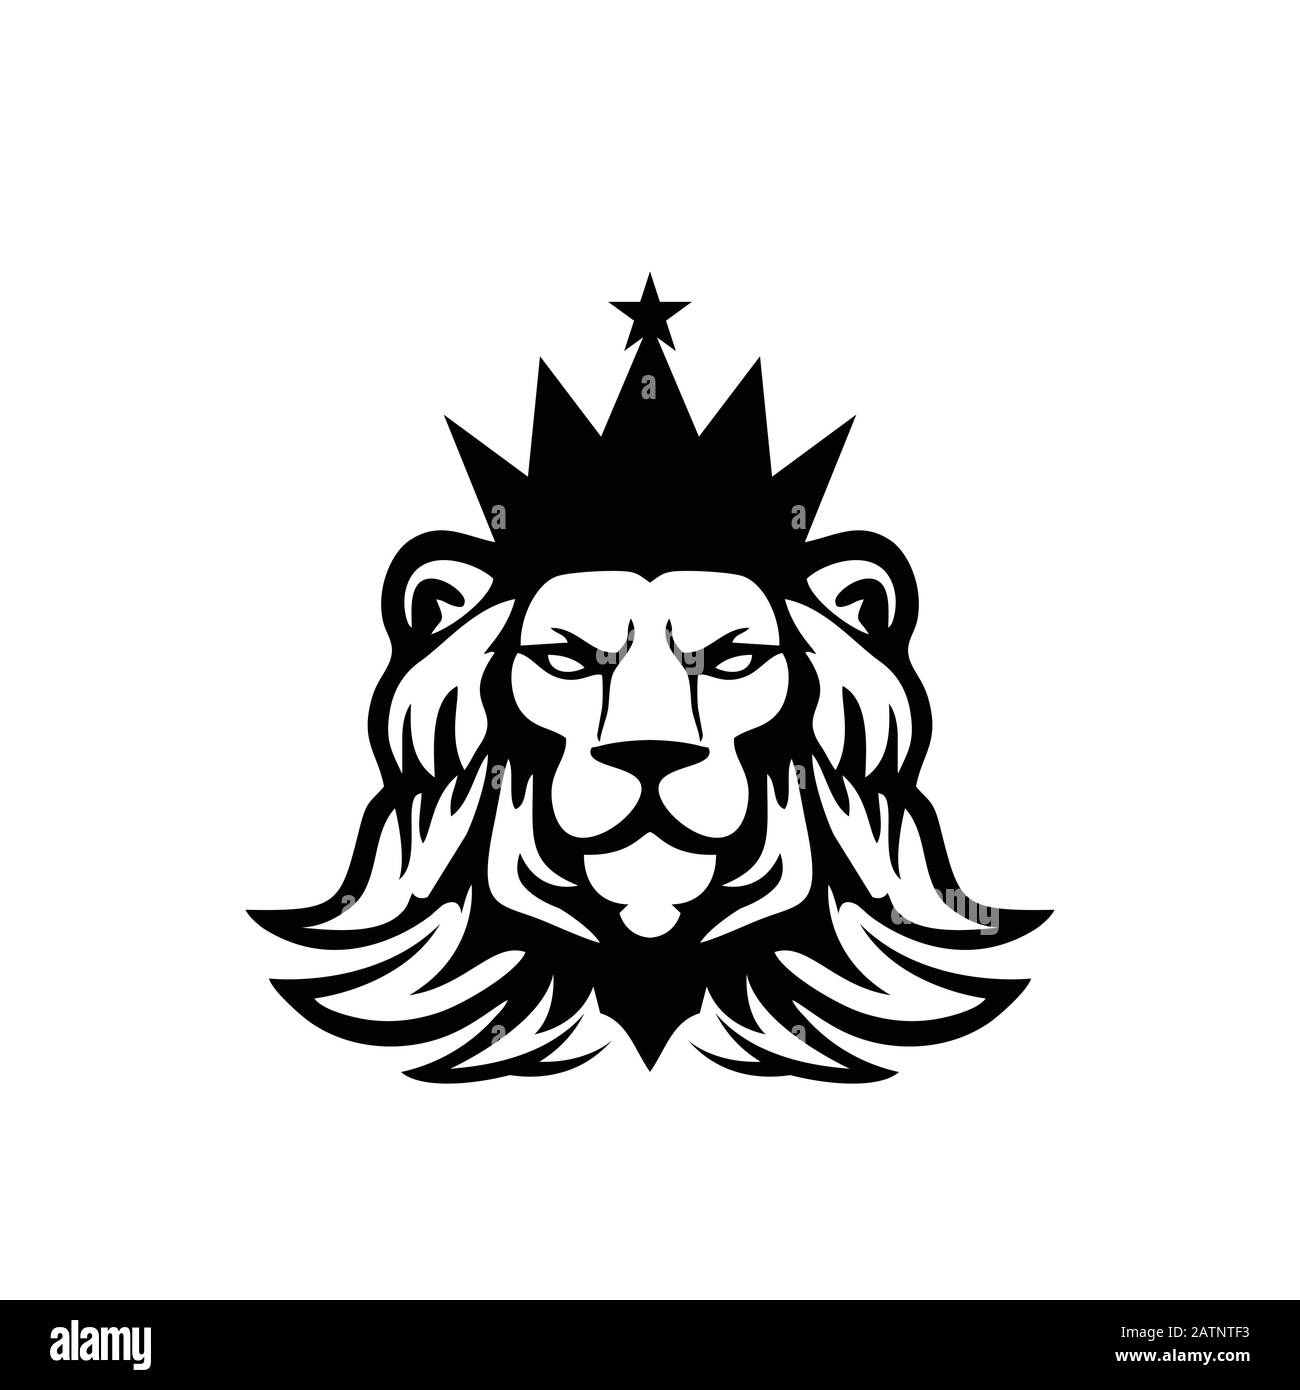 Lions Black And White Logo